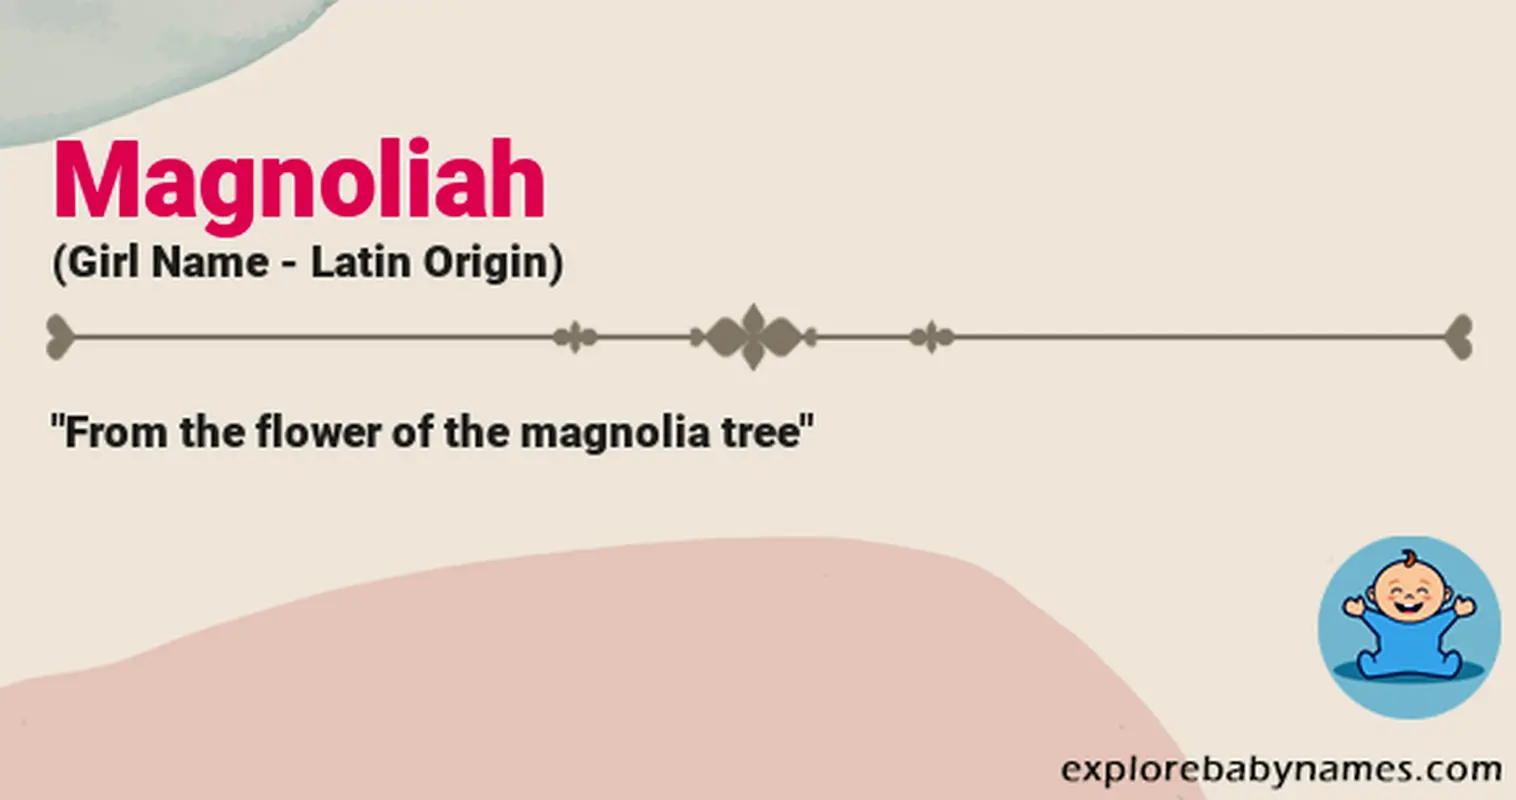 Meaning of Magnoliah